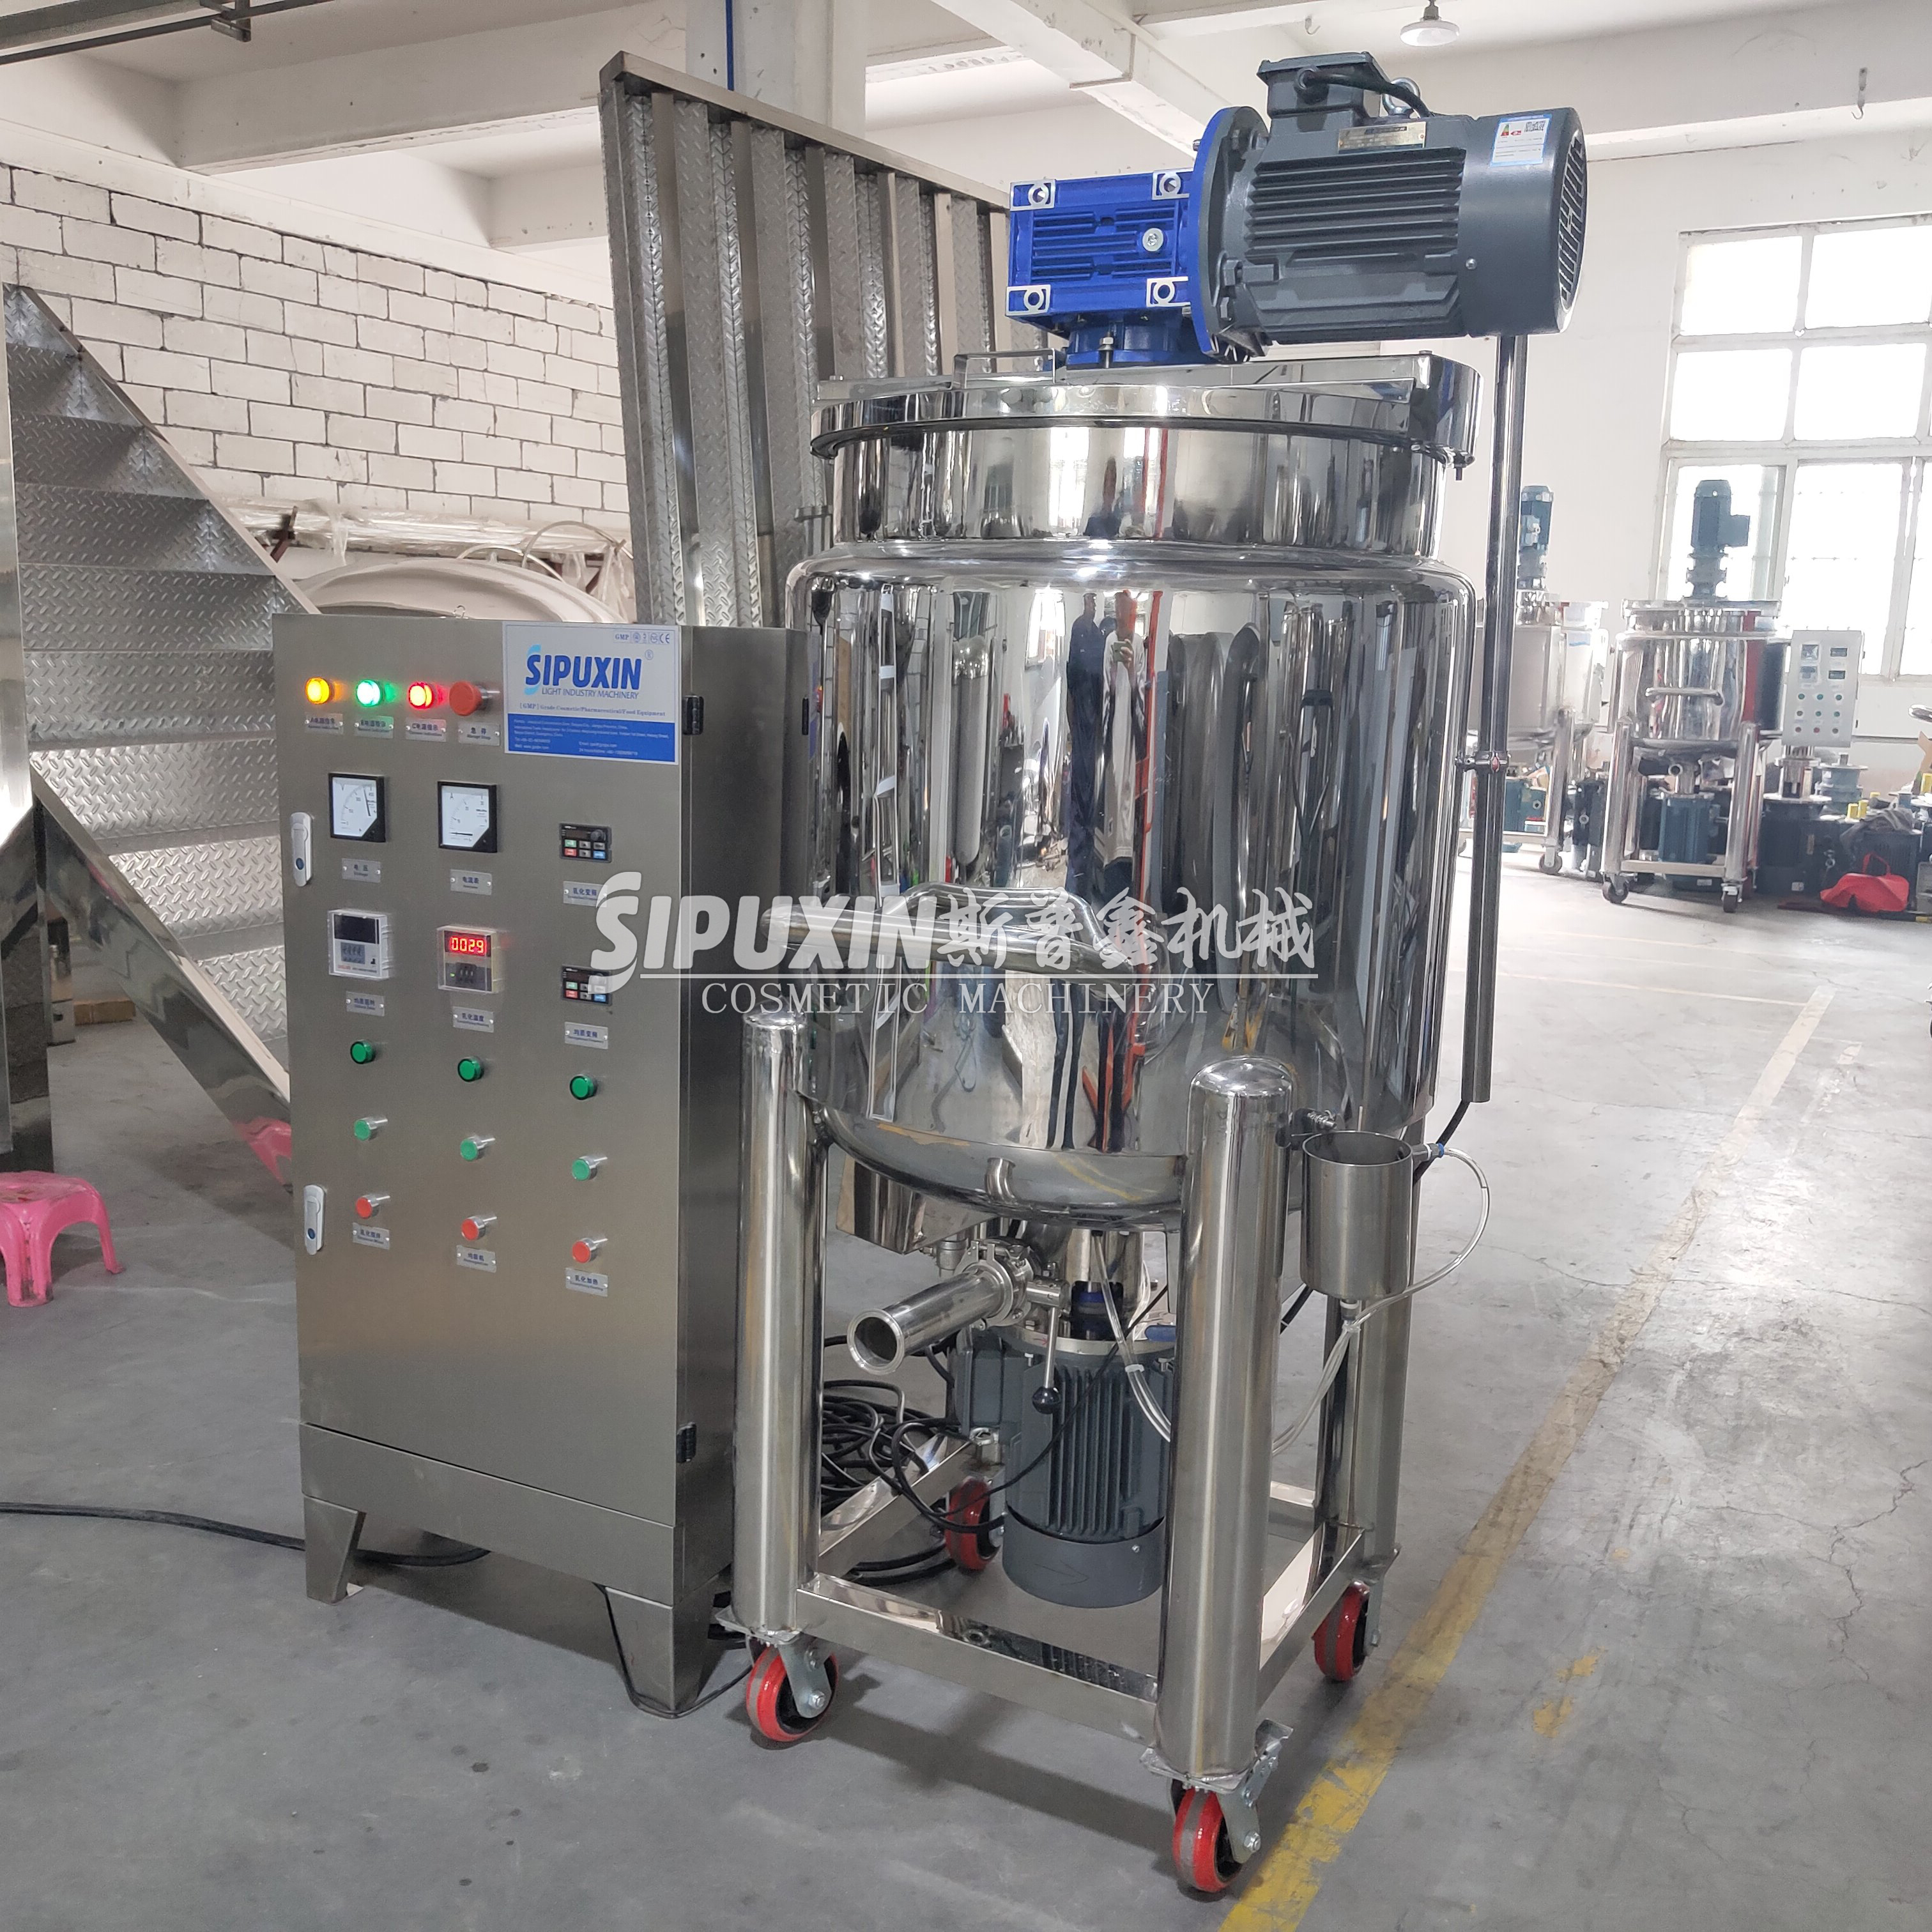 200L Heatable Liquid Industrial Blender with The External Electrical Box